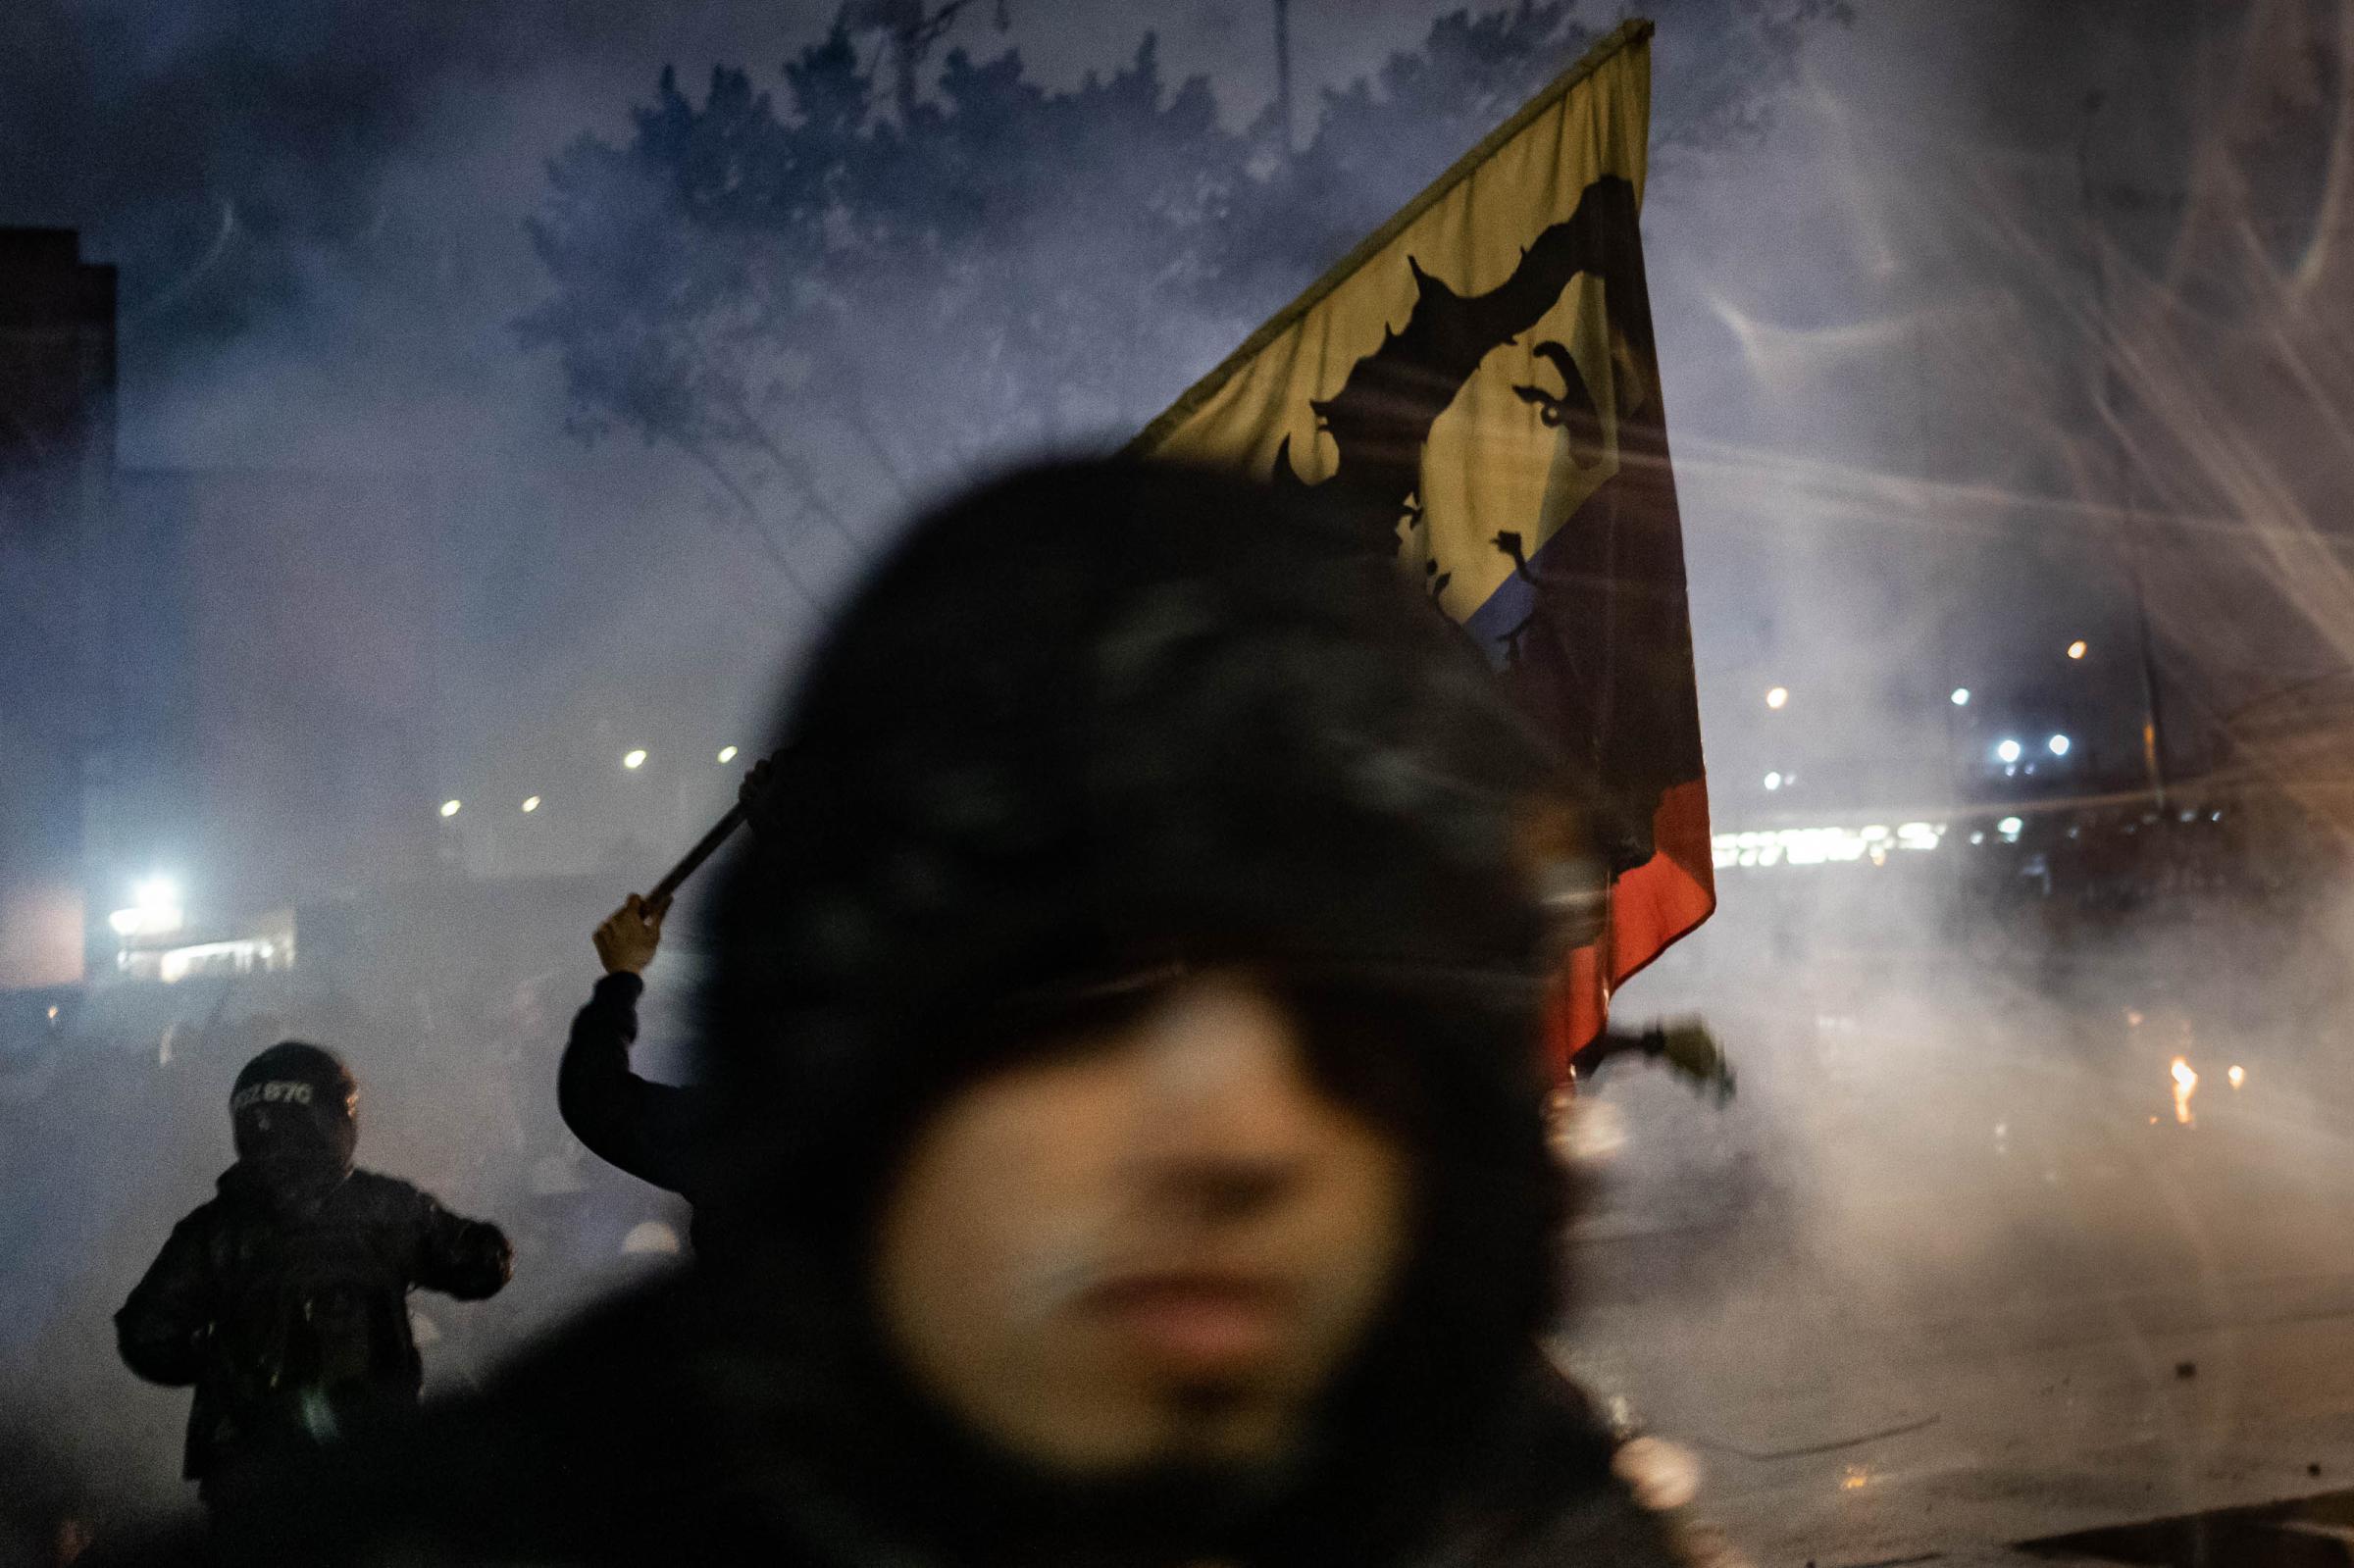 2021 in pictures - A protester runs amidst a cloud of teargas while carrying a flag emblazoned with the face of Che...